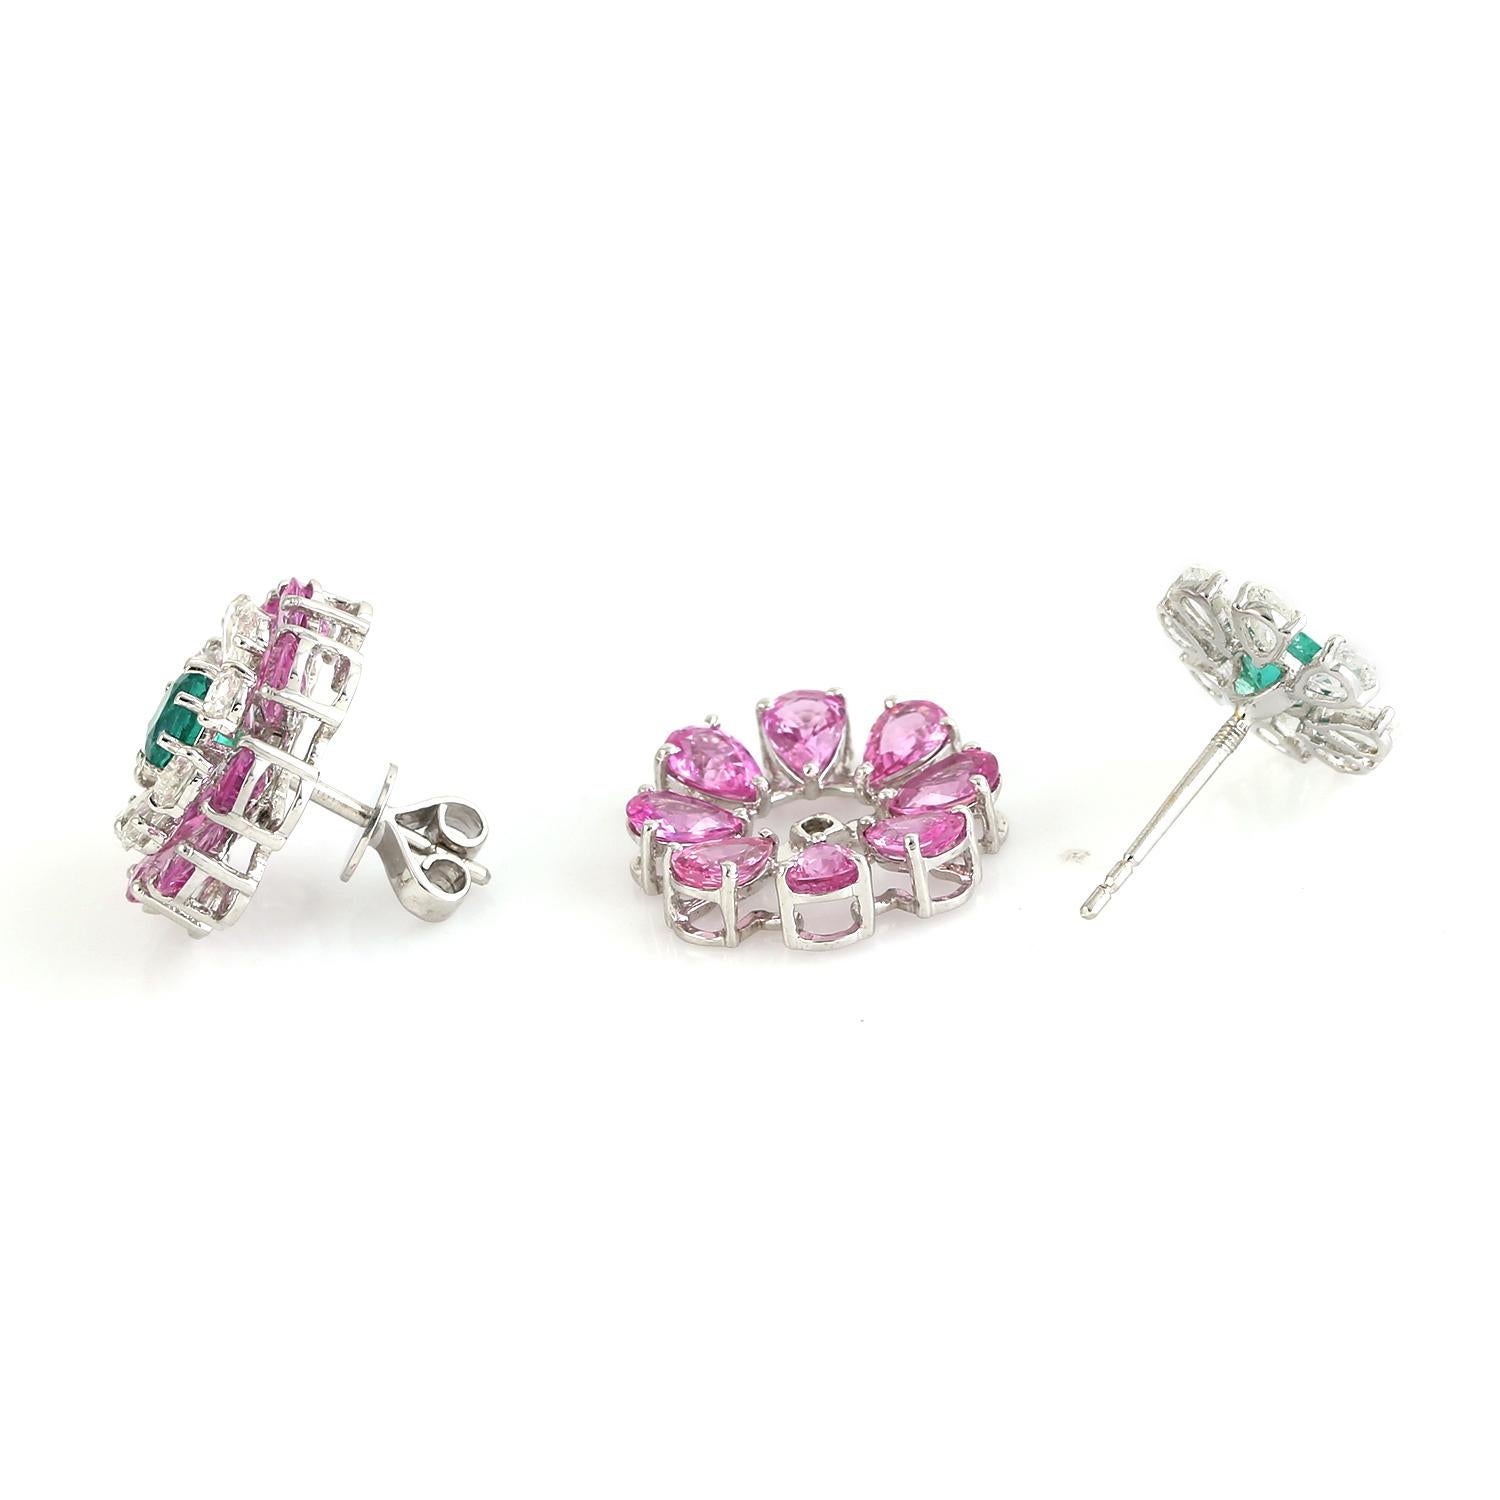 Mixed Cut 6.88 ct Pink Sapphire Earrings With Emerald Made In 18kt White Gold For Sale